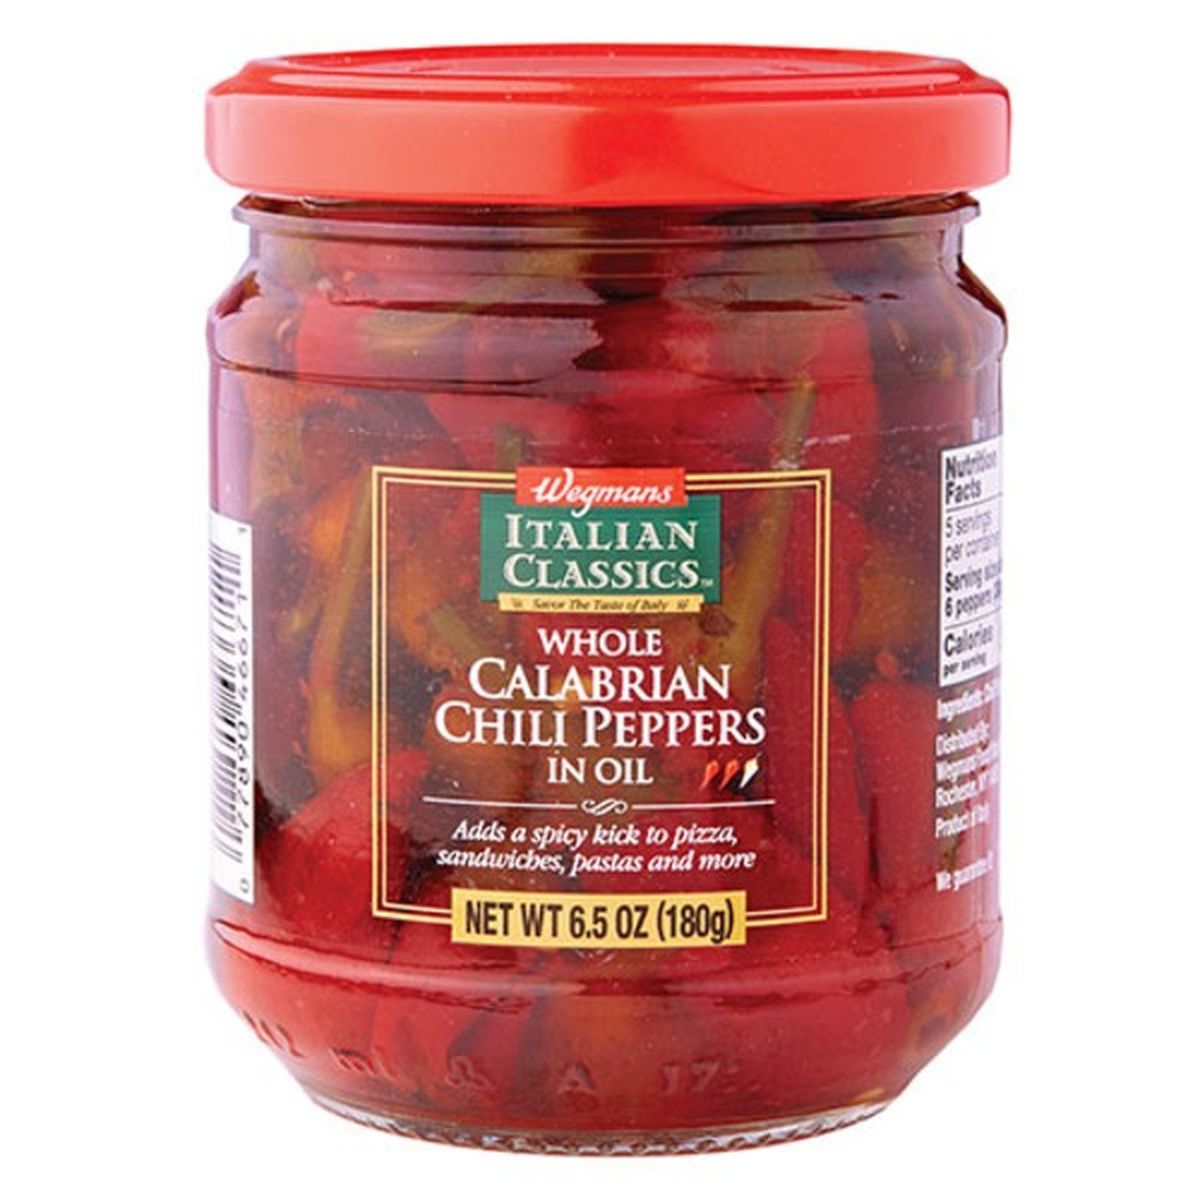 Calories in Wegmans Italian Classics Whole Calabrian Chili Peppers in Oil